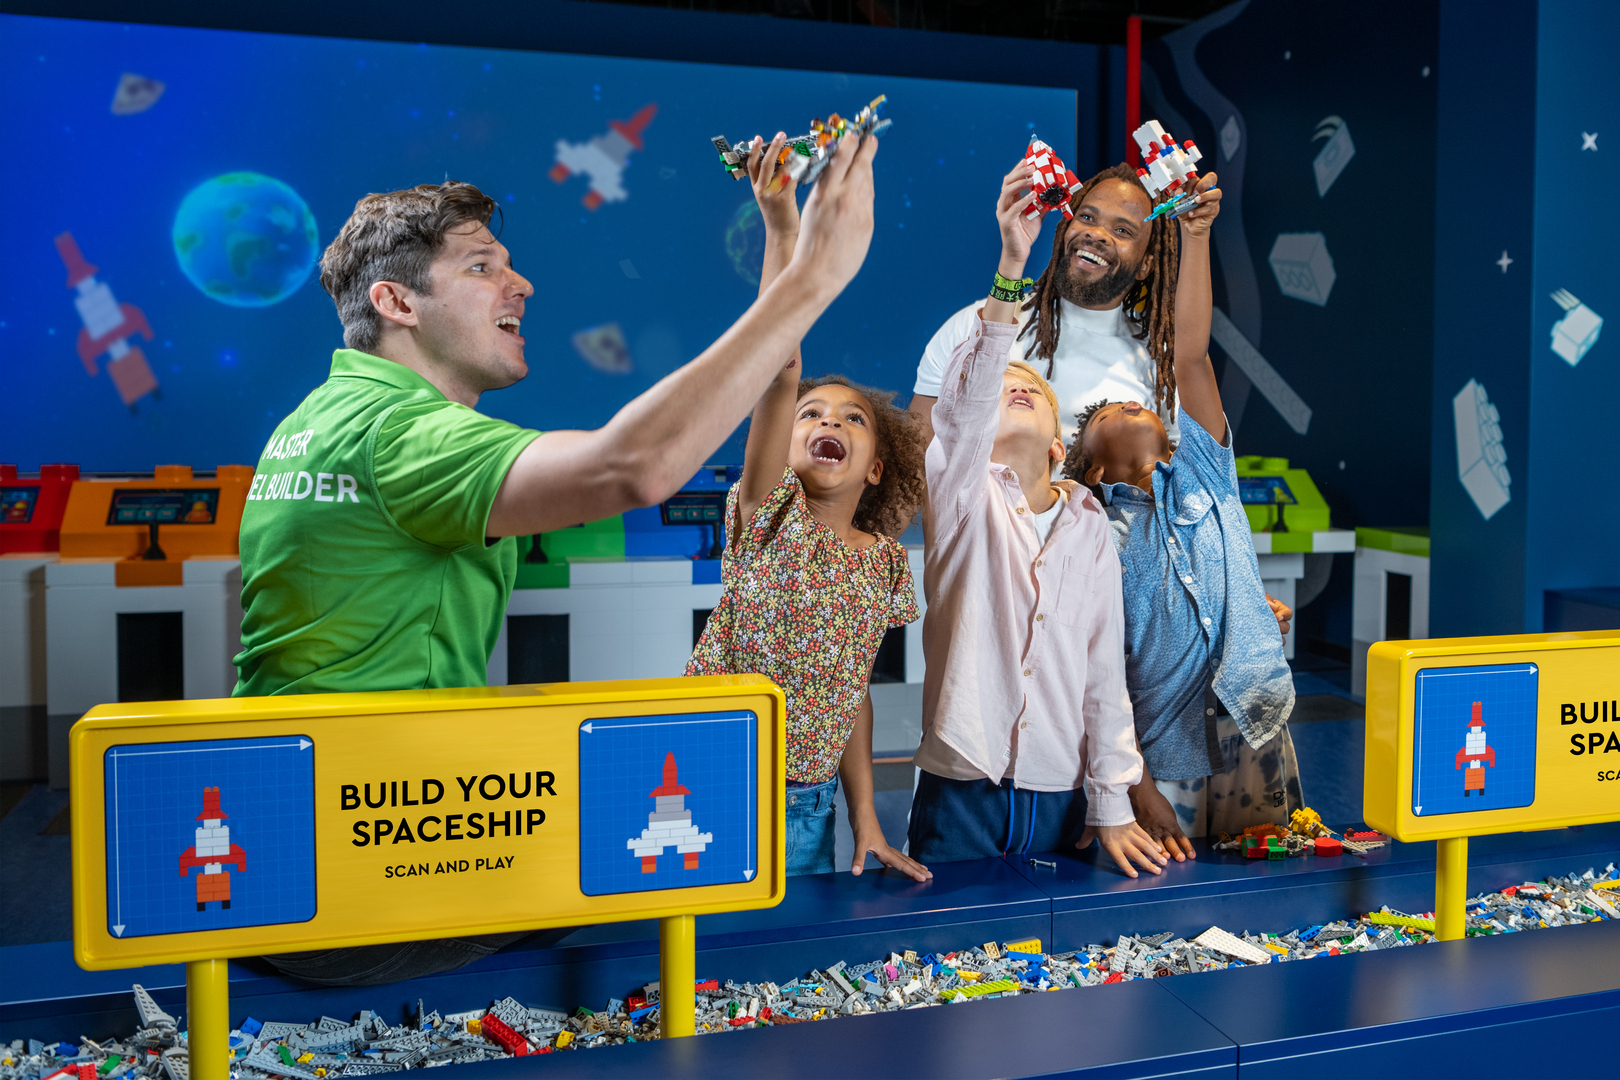 Teacher Appreciation Month - Free Admission + 50% Off Family/Friends in July, Atlanta, Georgia, United States